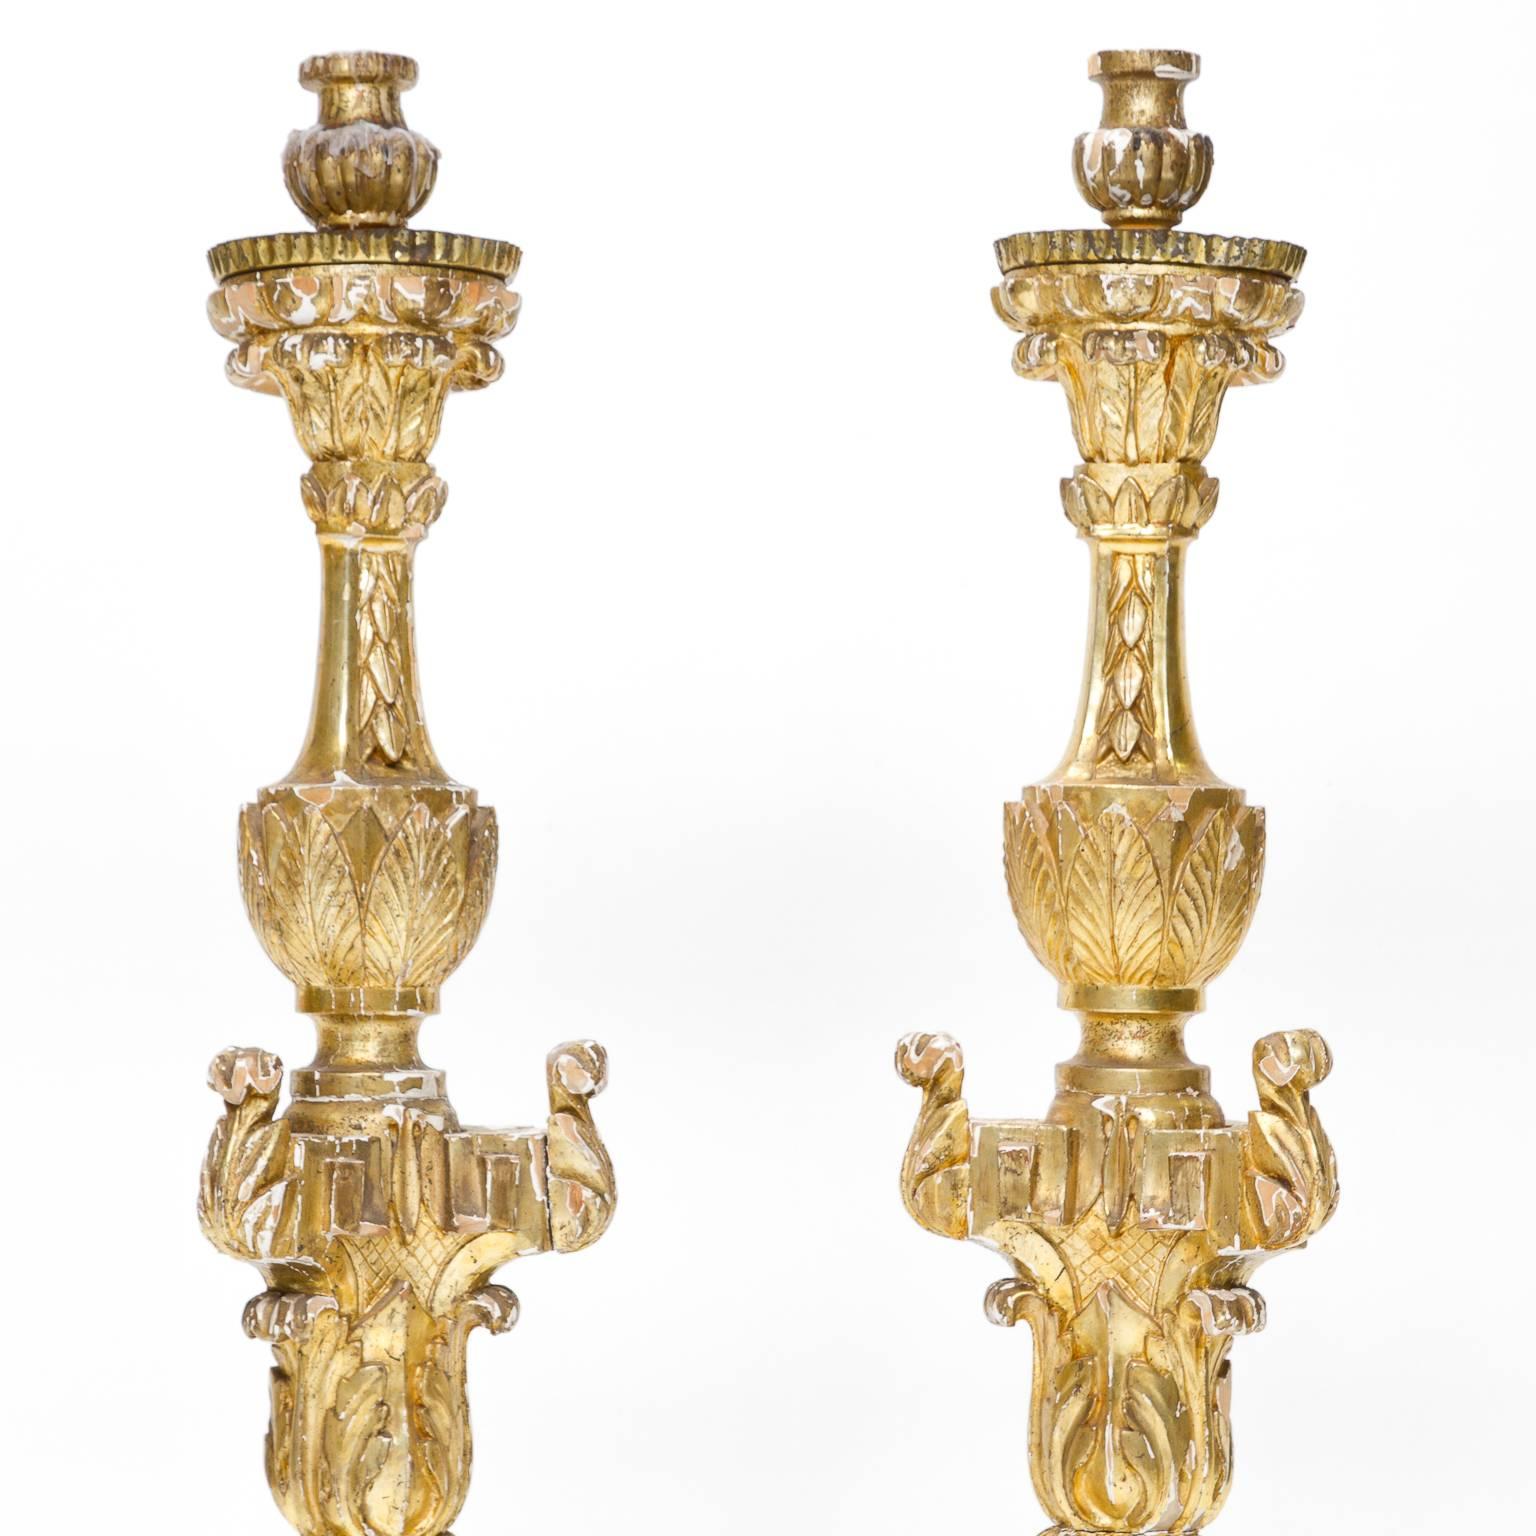 Early 19th century, French Altar candlesticks
A very nice pair of French Gold leaf with gesso candlesticks which were used in a church. Purchased in France.